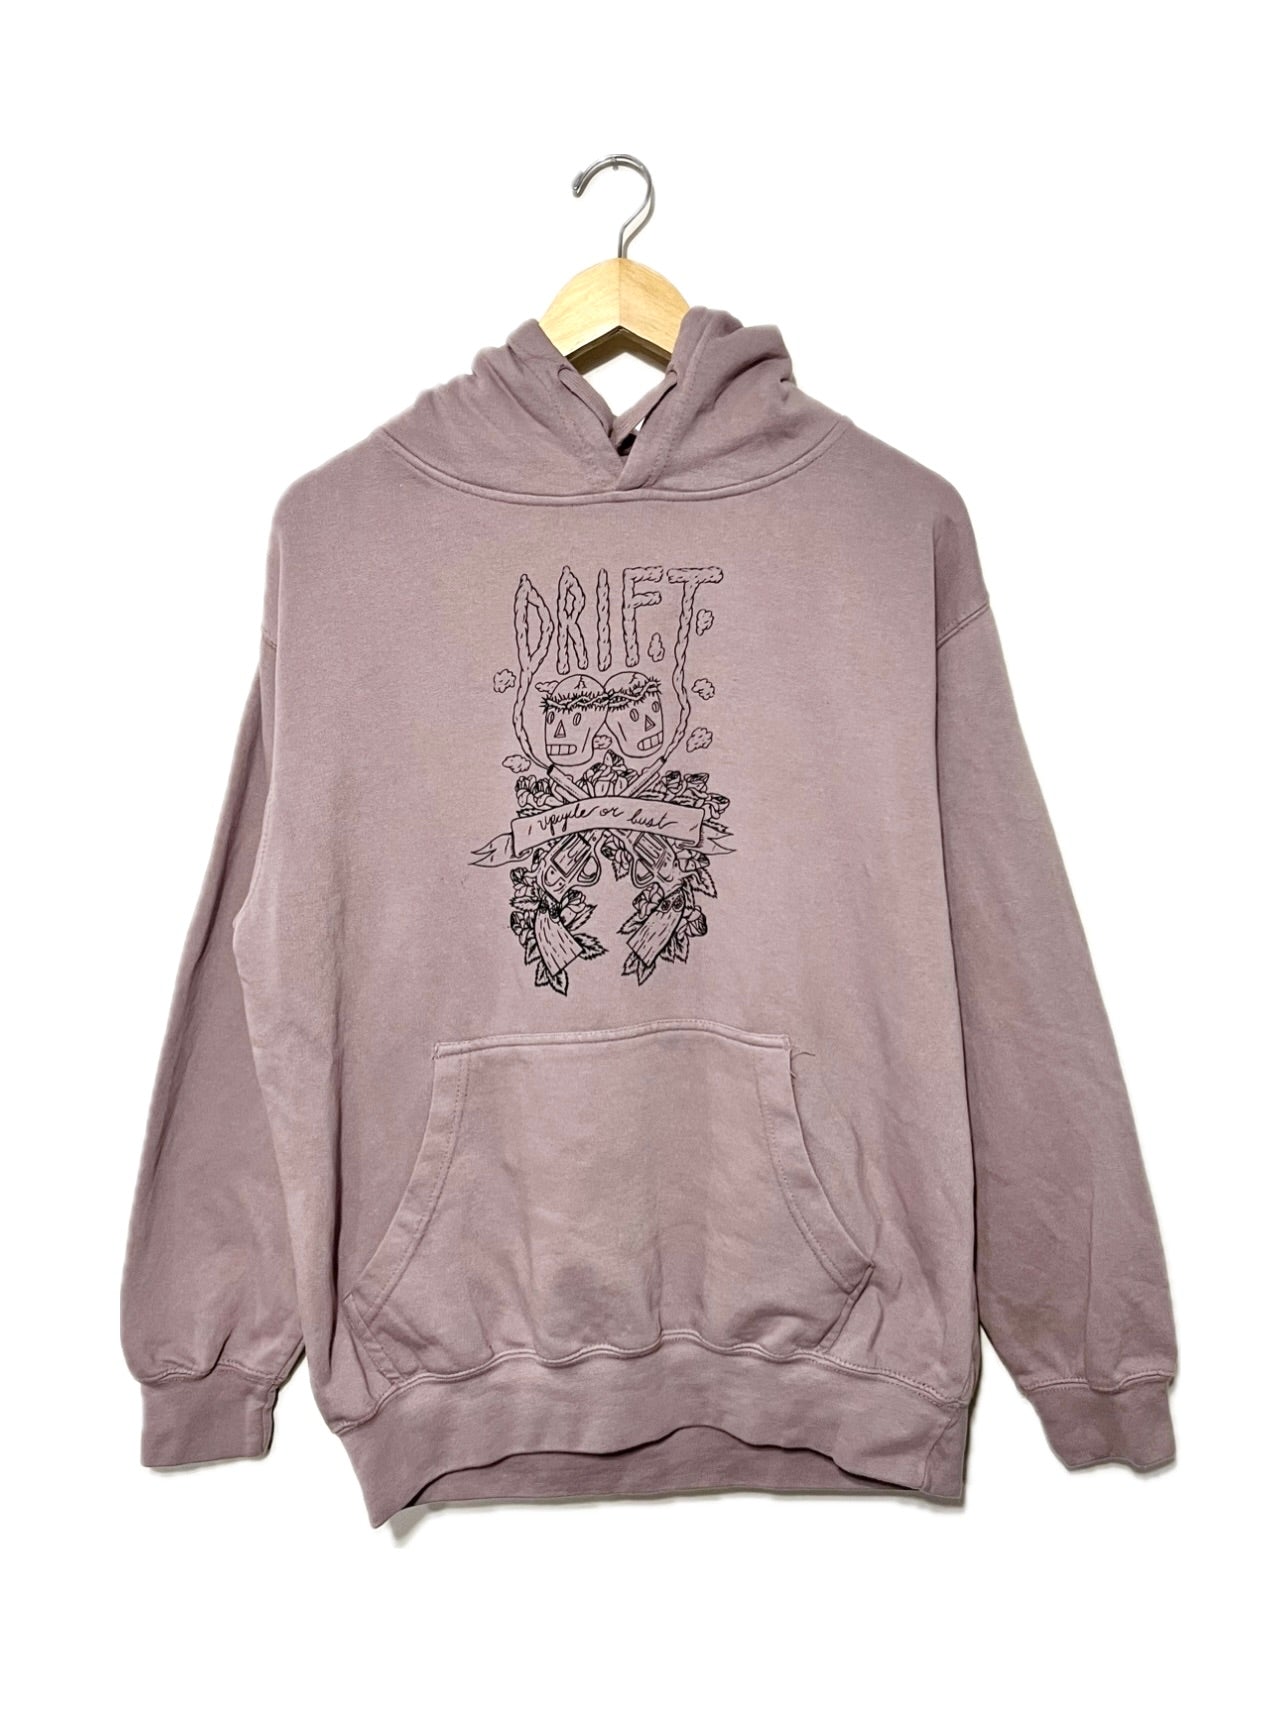 OUTLAW HOODIE